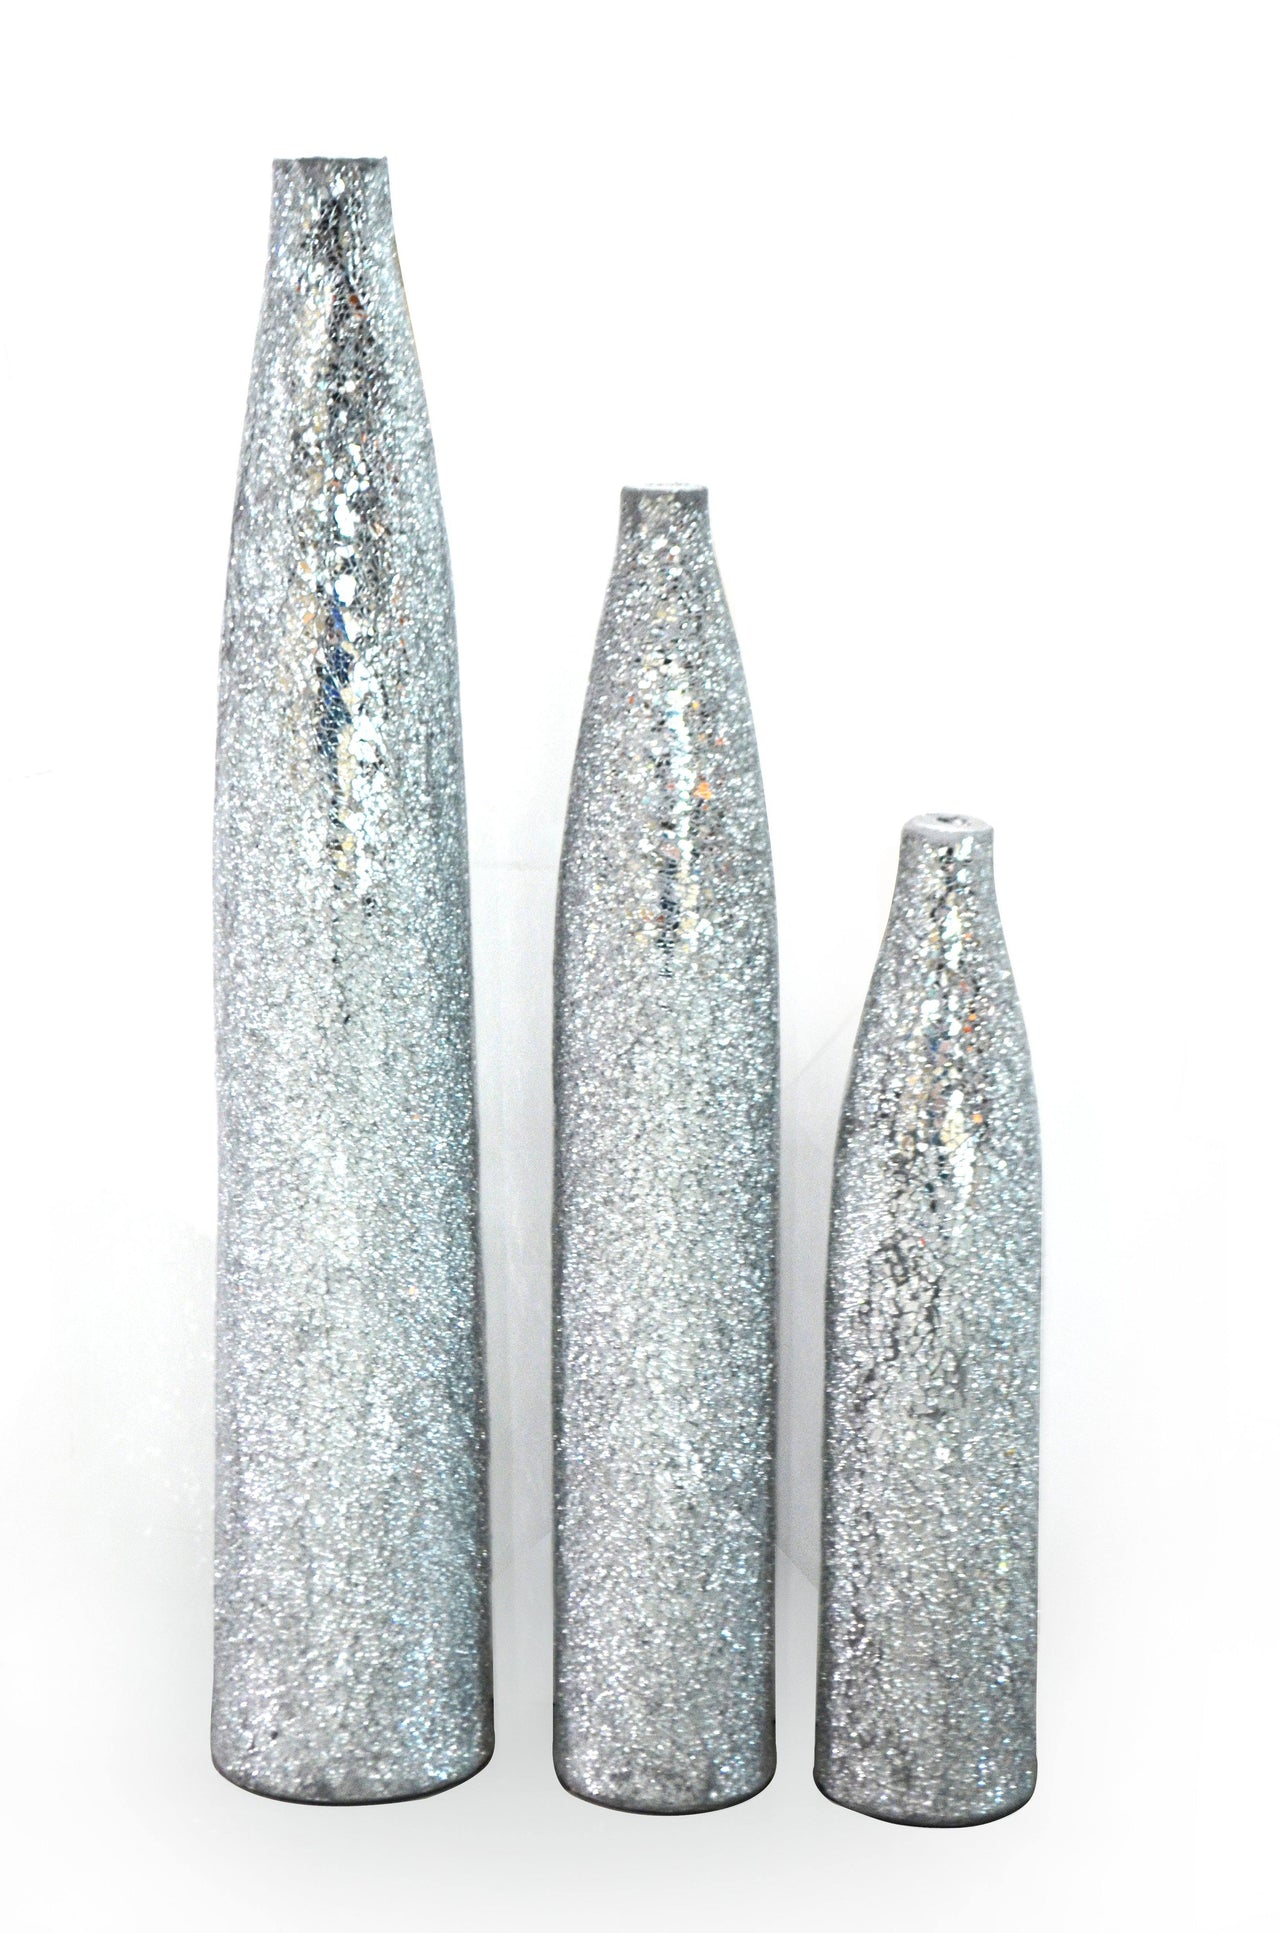 AFD Laviere Bullet Vases Set of 3 Décor AFD Mirrored 